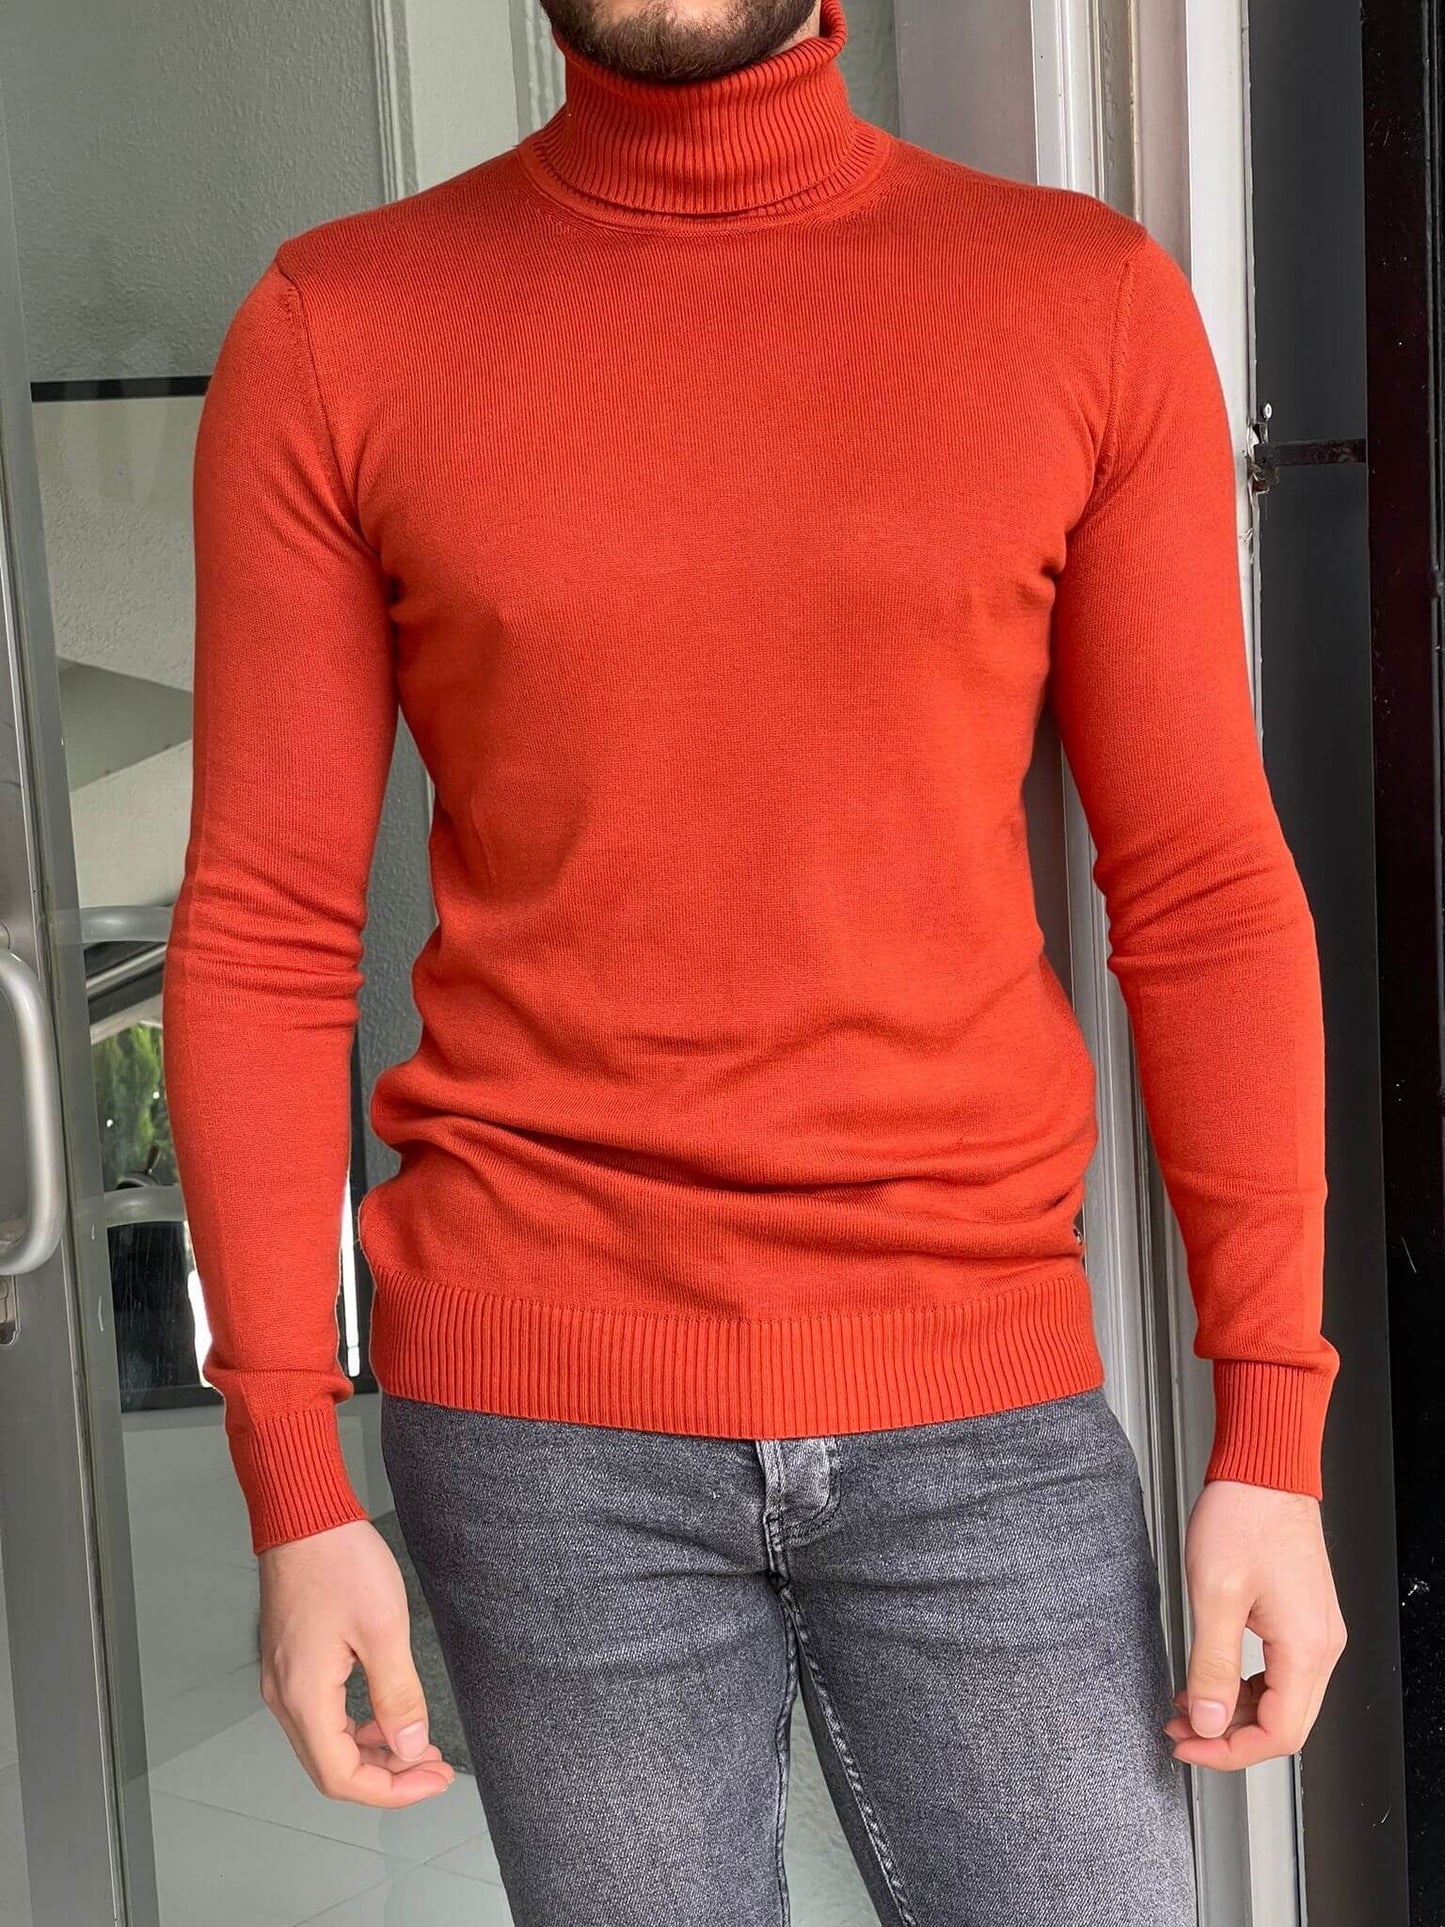 An orange turtleneck sweater, featuring a ribbed knit texture and a cozy, high neckline.